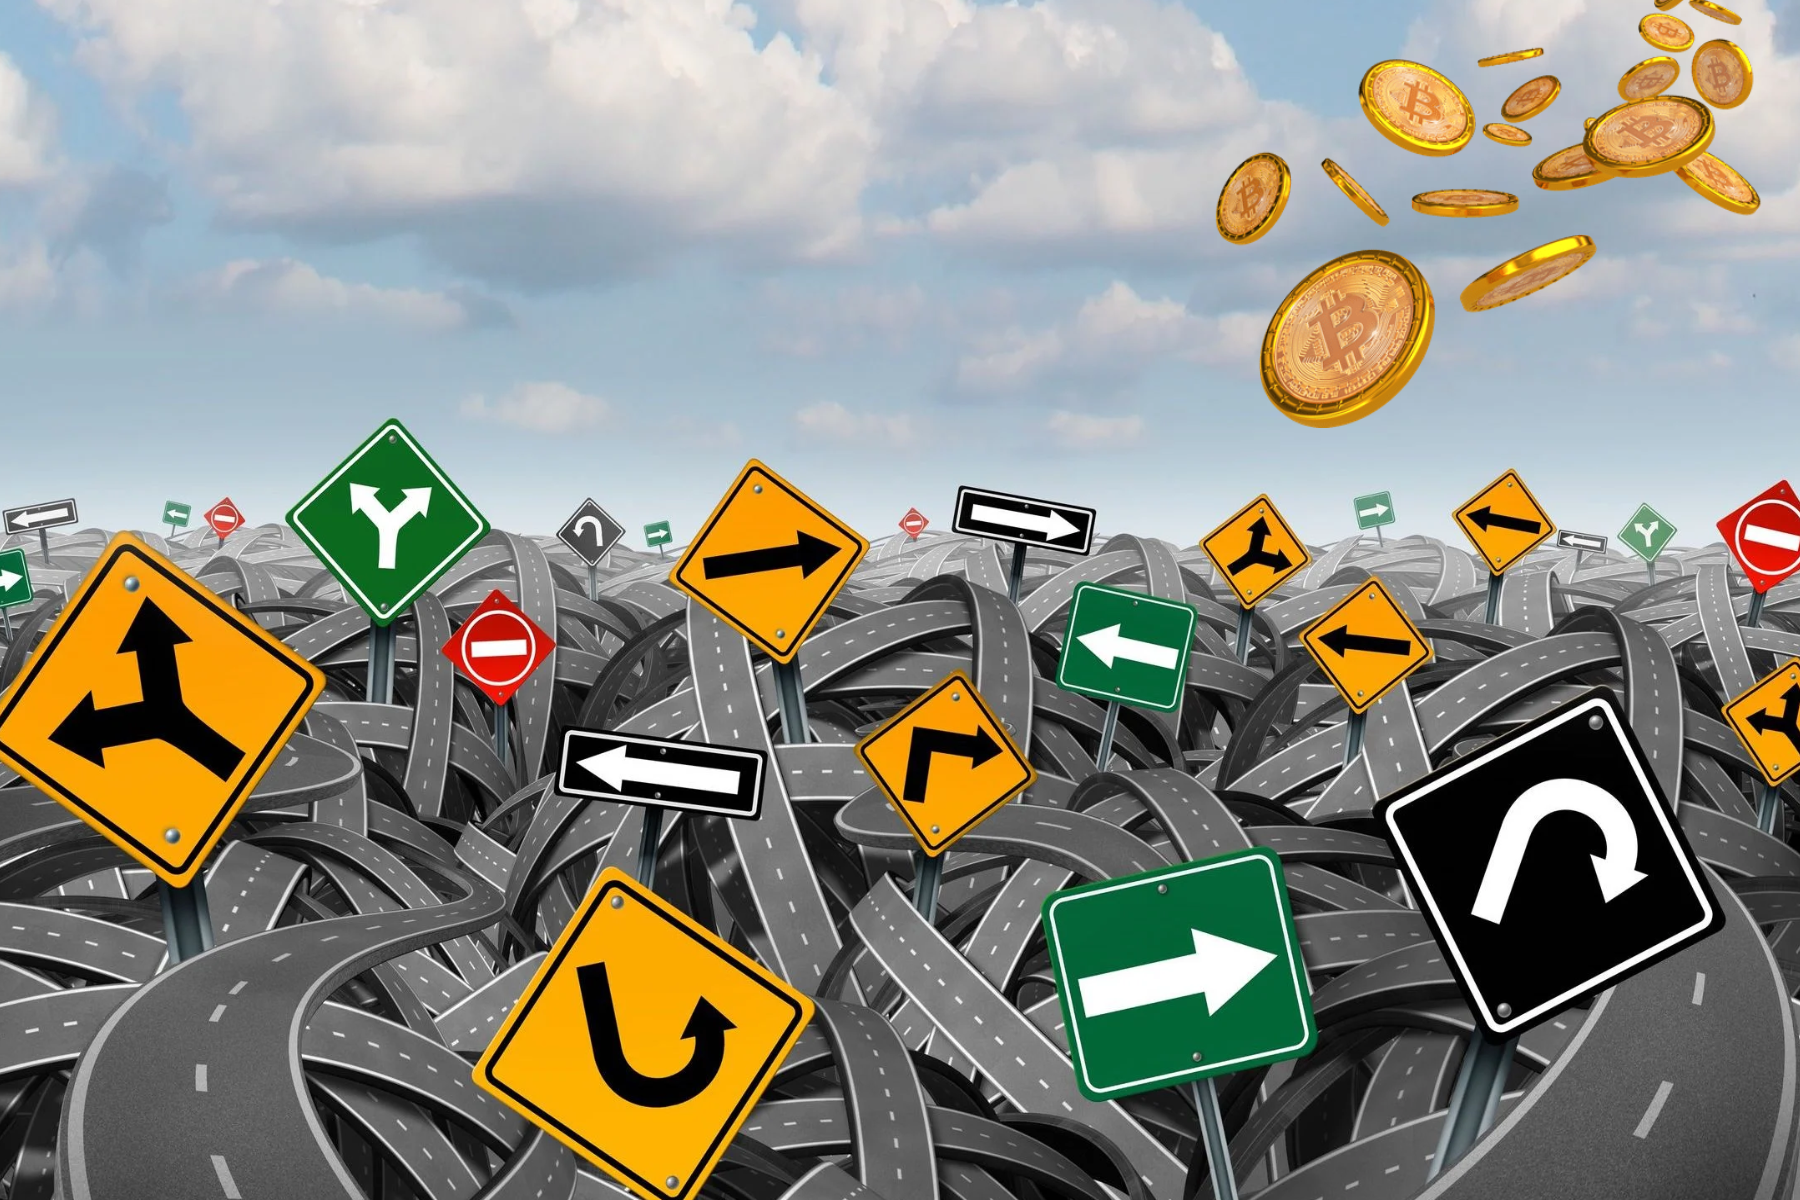 A road with winding curves and various traffic signs, with digital Bitcoins falling from the sky